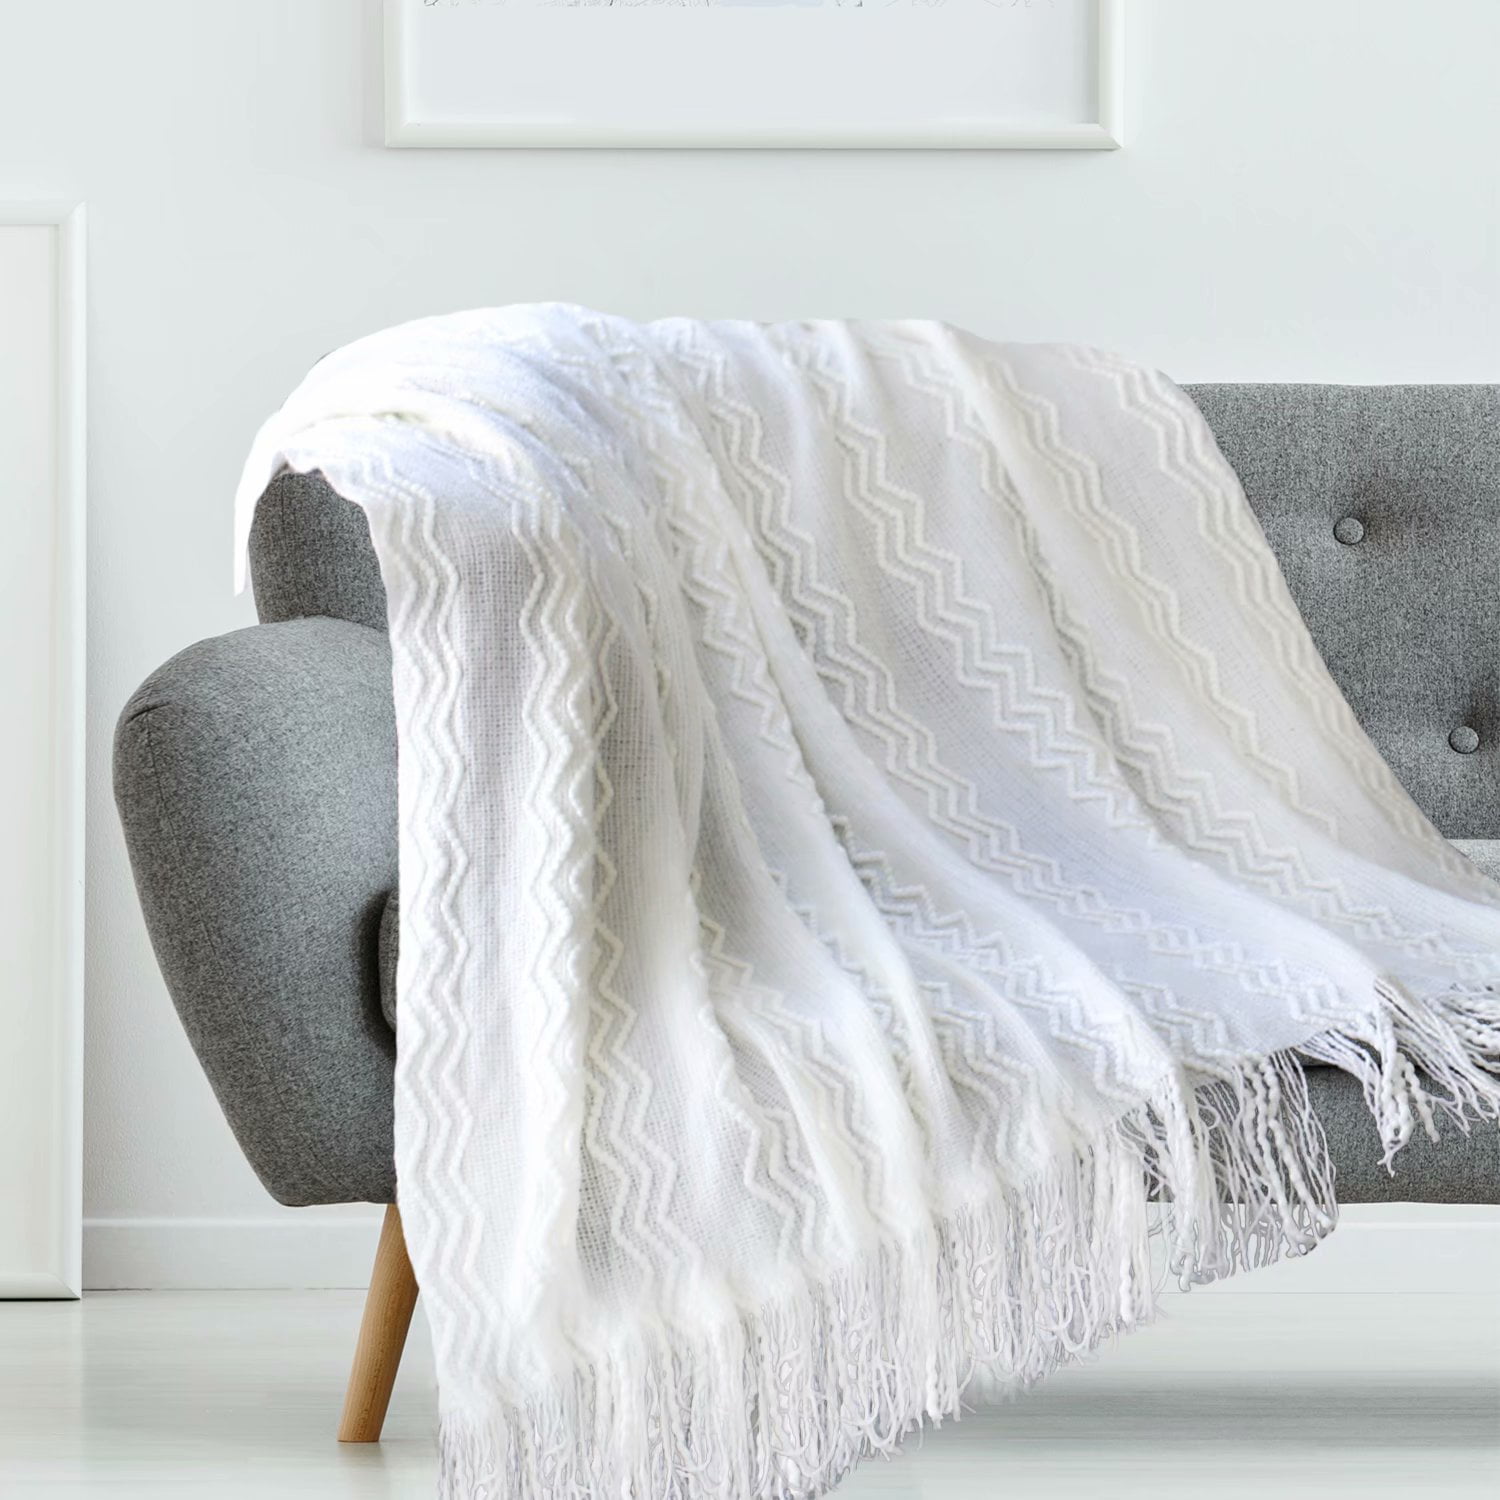 Gray, 127 x152cm/50 x 60 Lightweight and Soft Cozy Decorative Woven Blanket GuLL Knitted Throw Blanket with Tassels for Sofa Bed Chair or Travel 